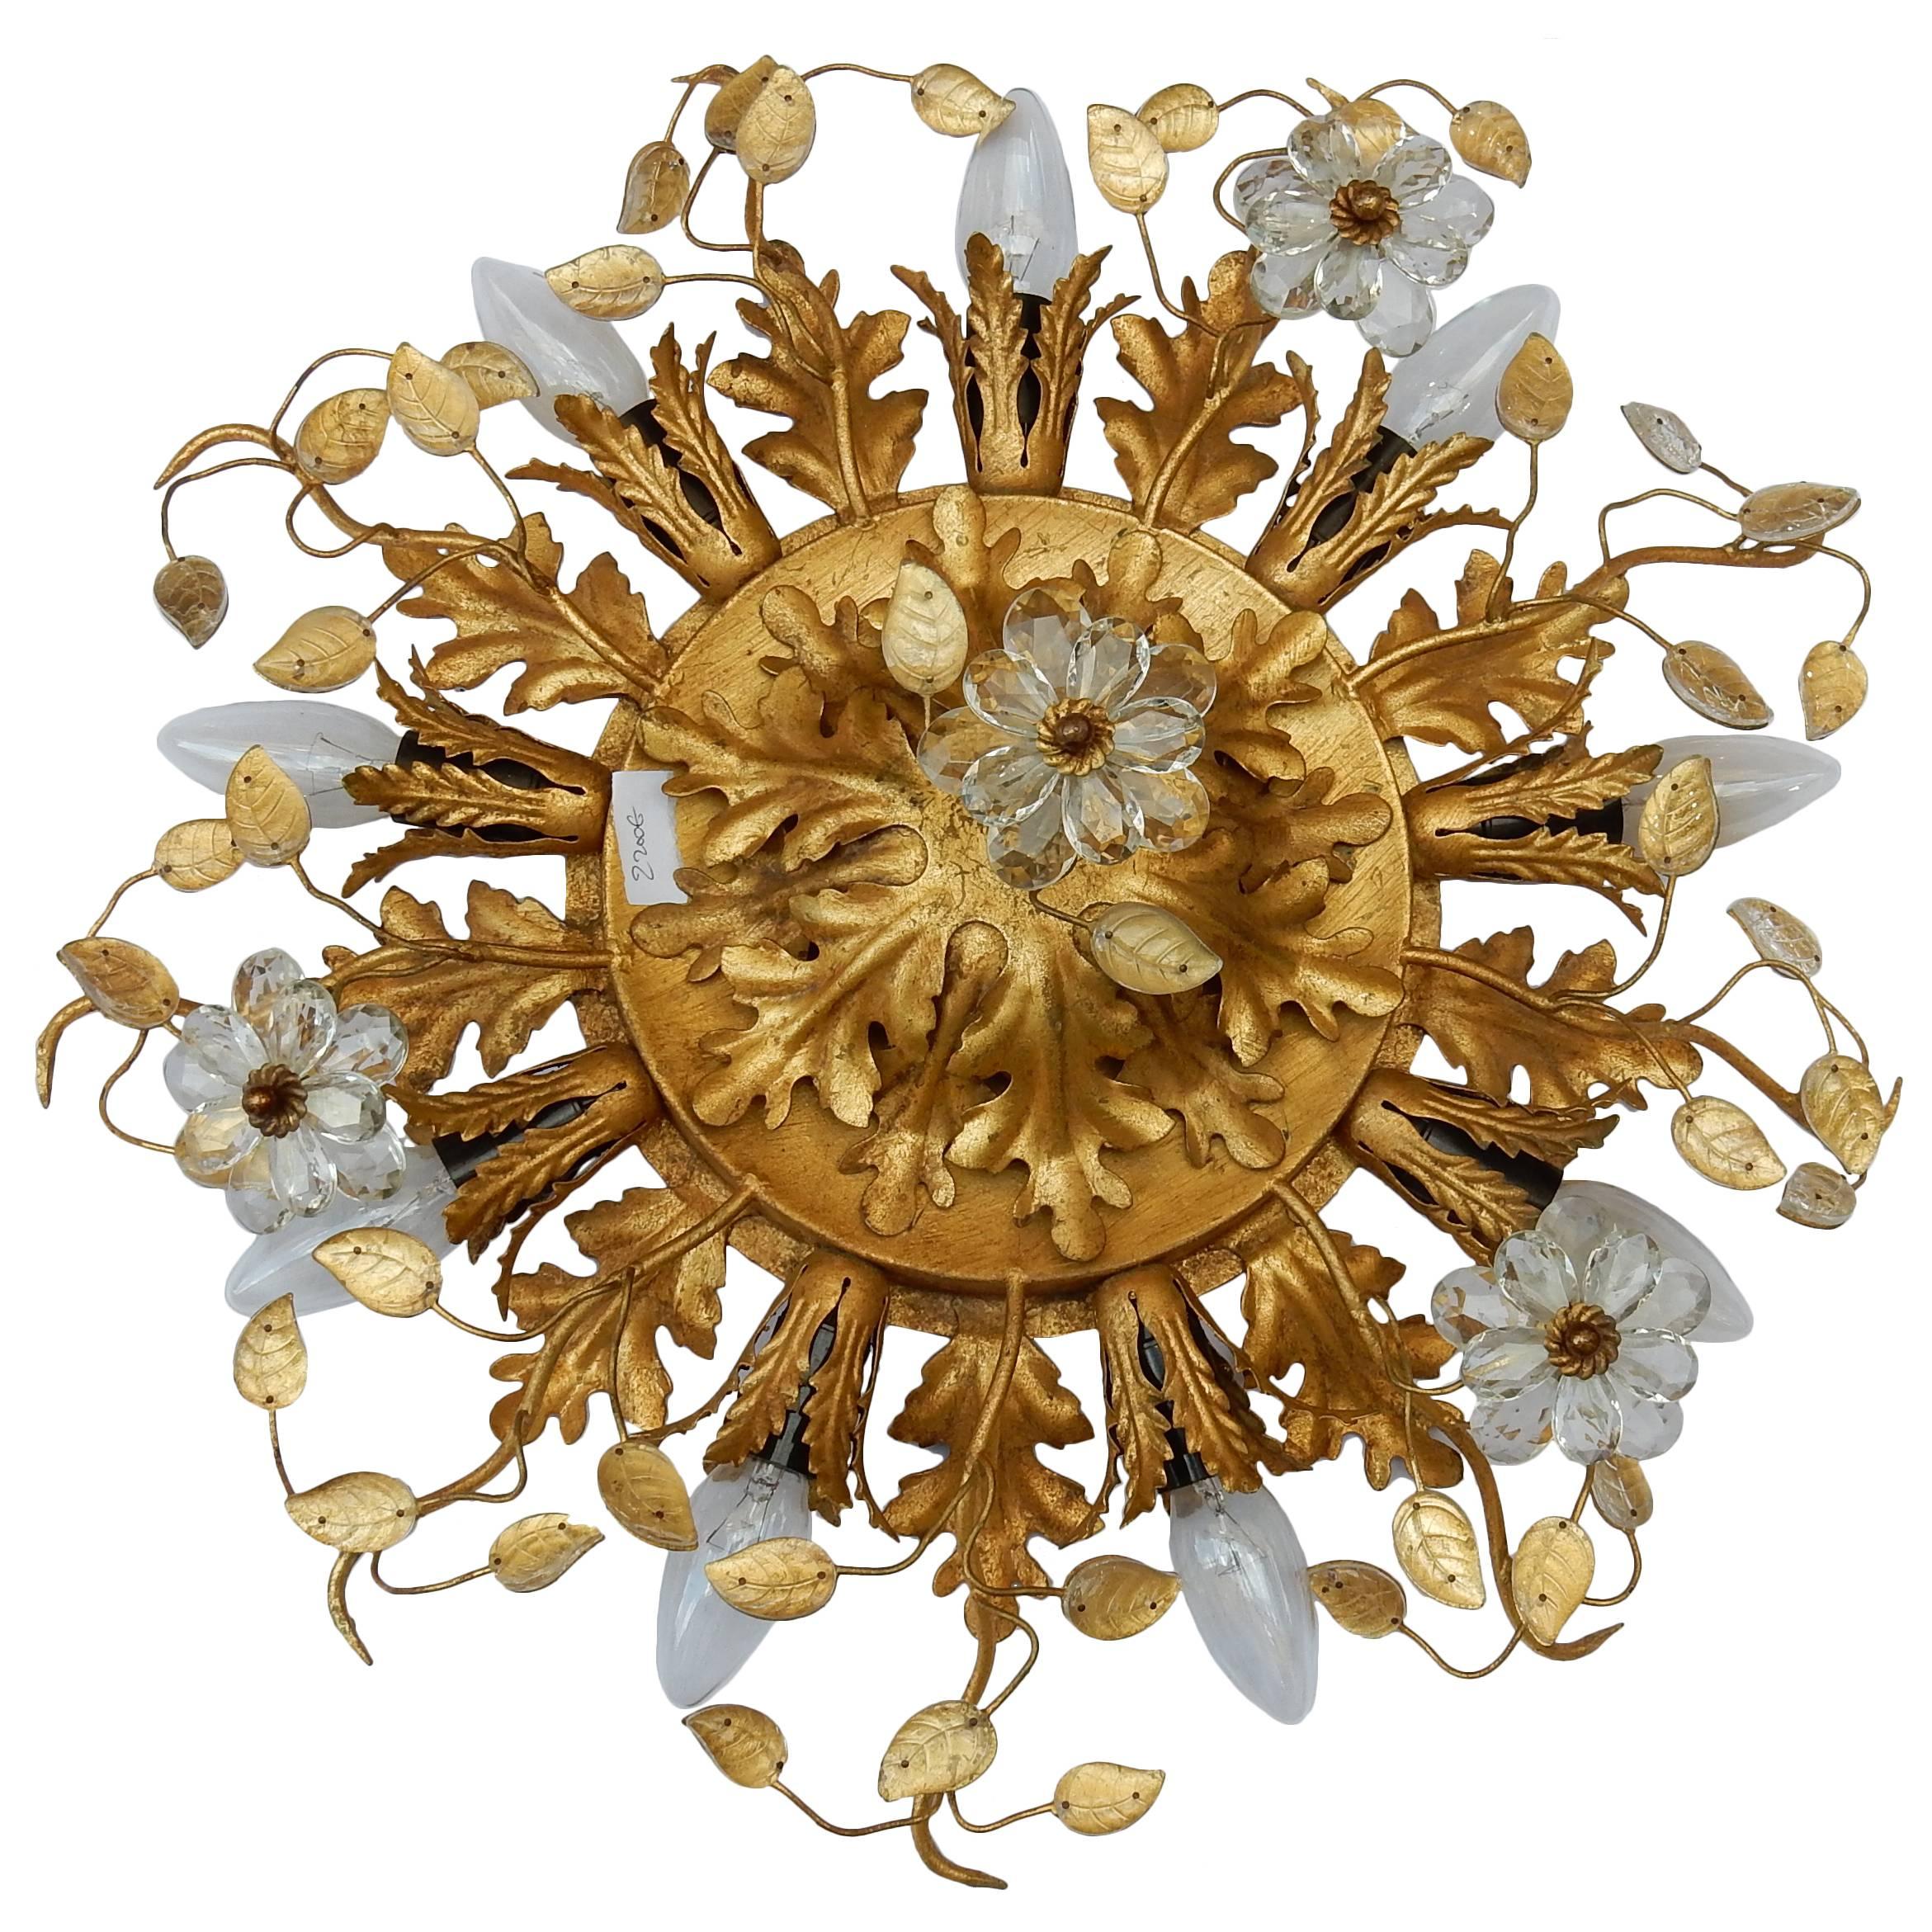 1950-1970 Ceiling Light Has Floral Decoration in the Style of Maison Baguès